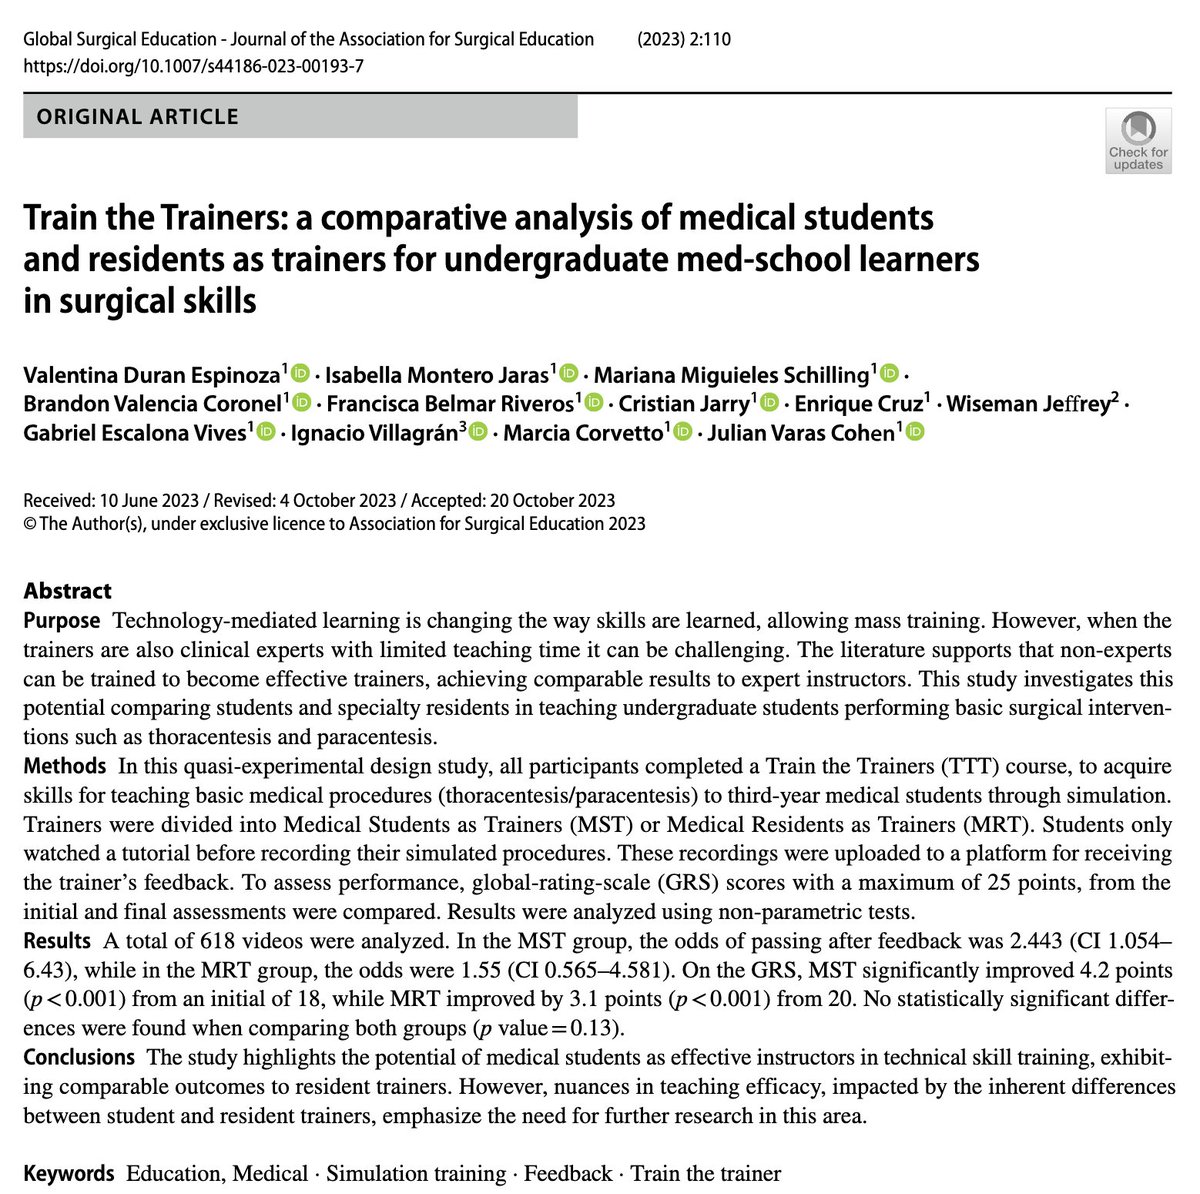 Strategies to scale assessment of #technical #surgical #skills maintaining quality that work. Great manuscript @vduranesp Study with collab between @SimulacionUC and @mcgillsim 👏👏👏 @gaboescvi @GSE_JASE Study: rdcu.be/drjbD